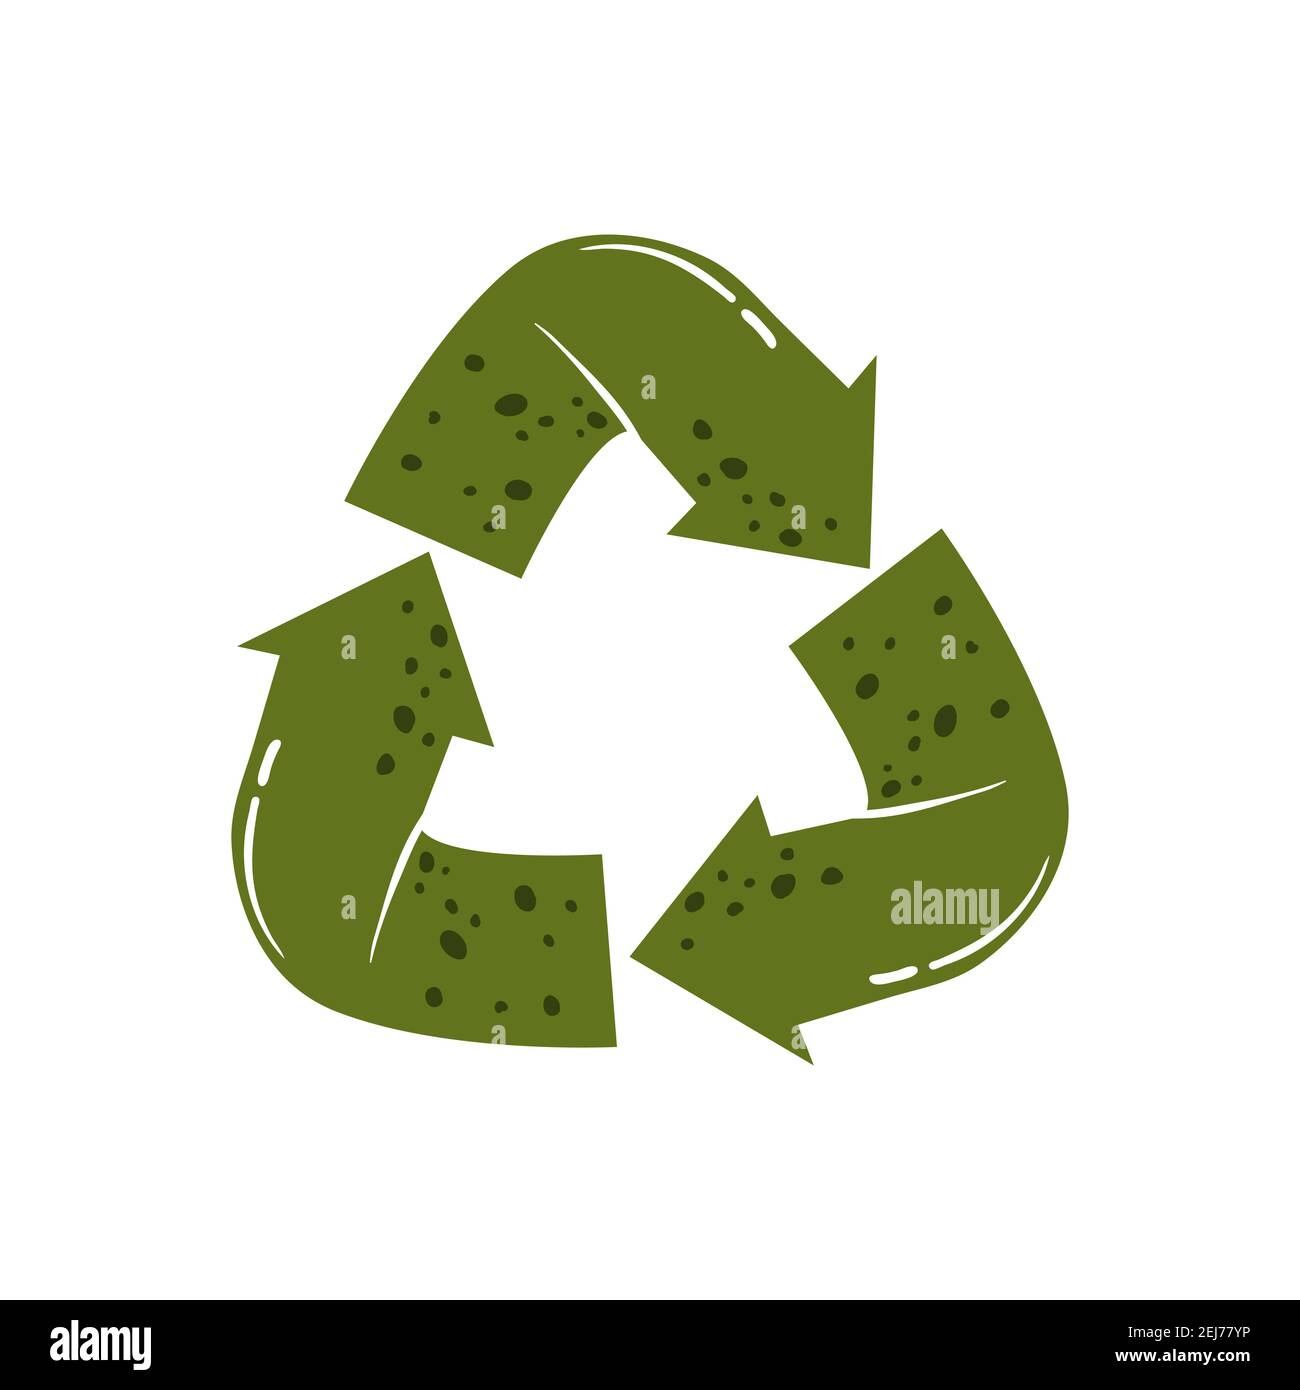 109,225 Reduce Reuse Recycle Images, Stock Photos, 3D objects, & Vectors